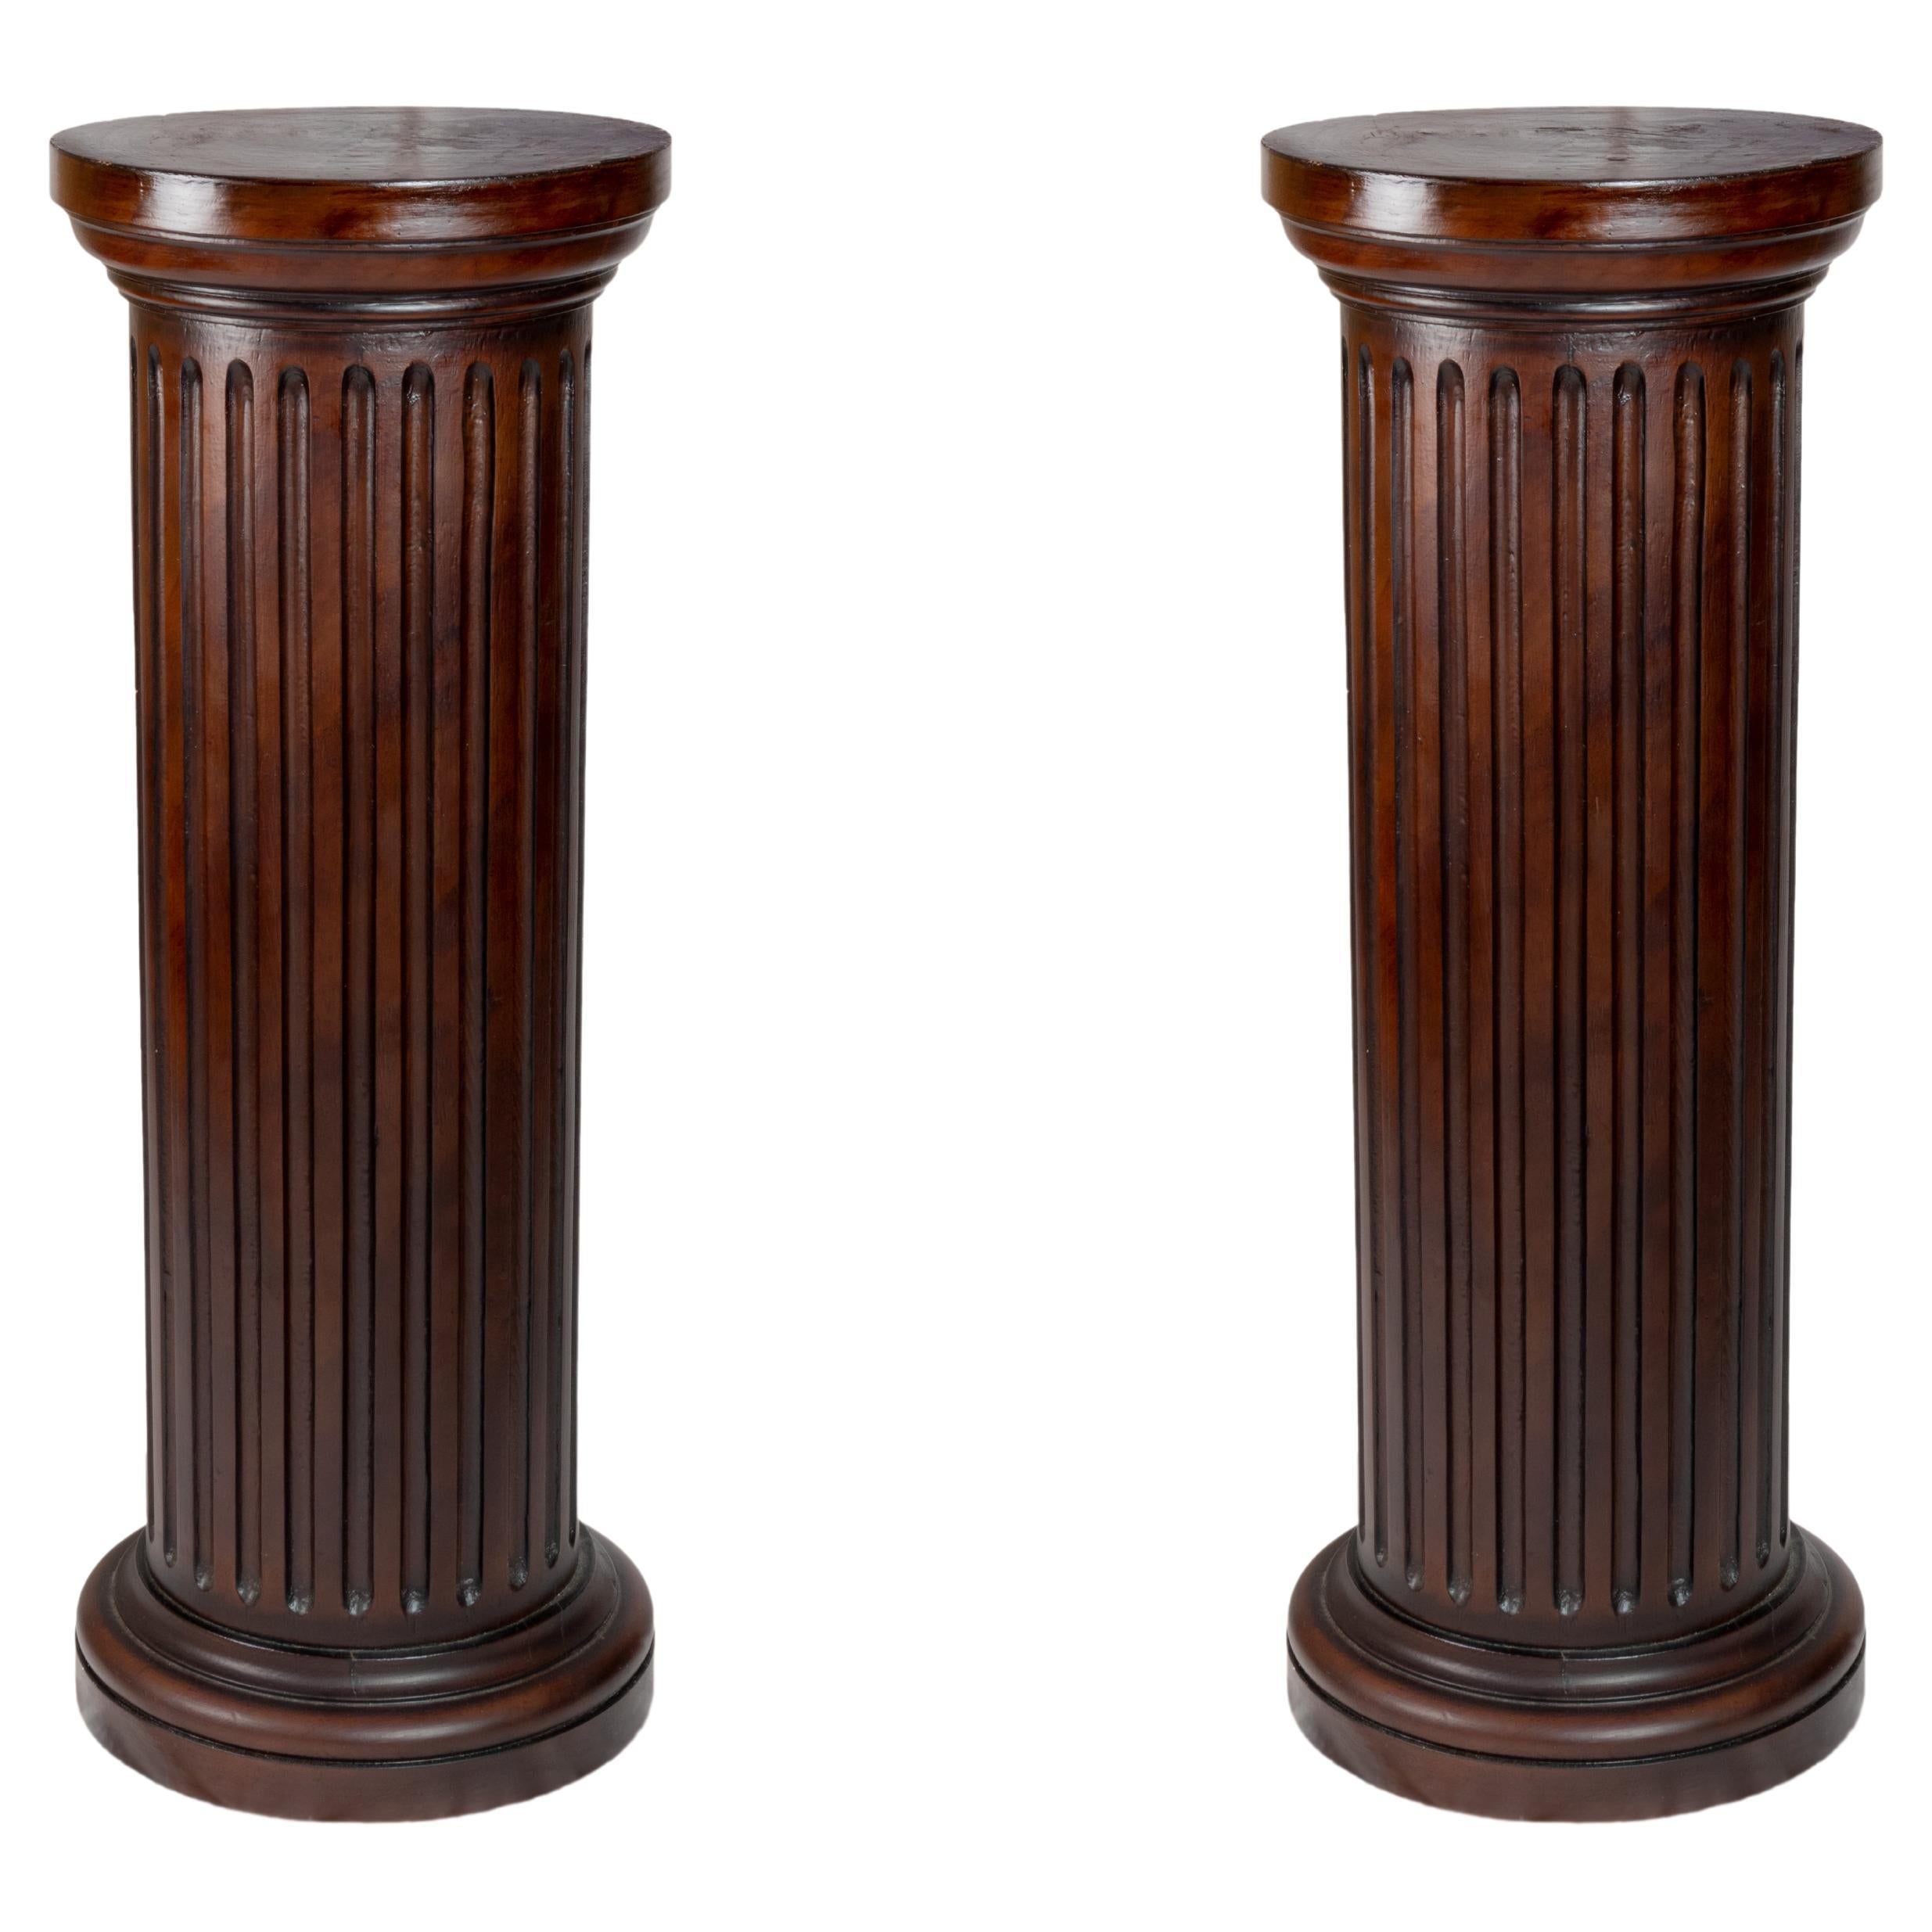  Pair Of French Fluted Wood Columns, 19th Century For Sale